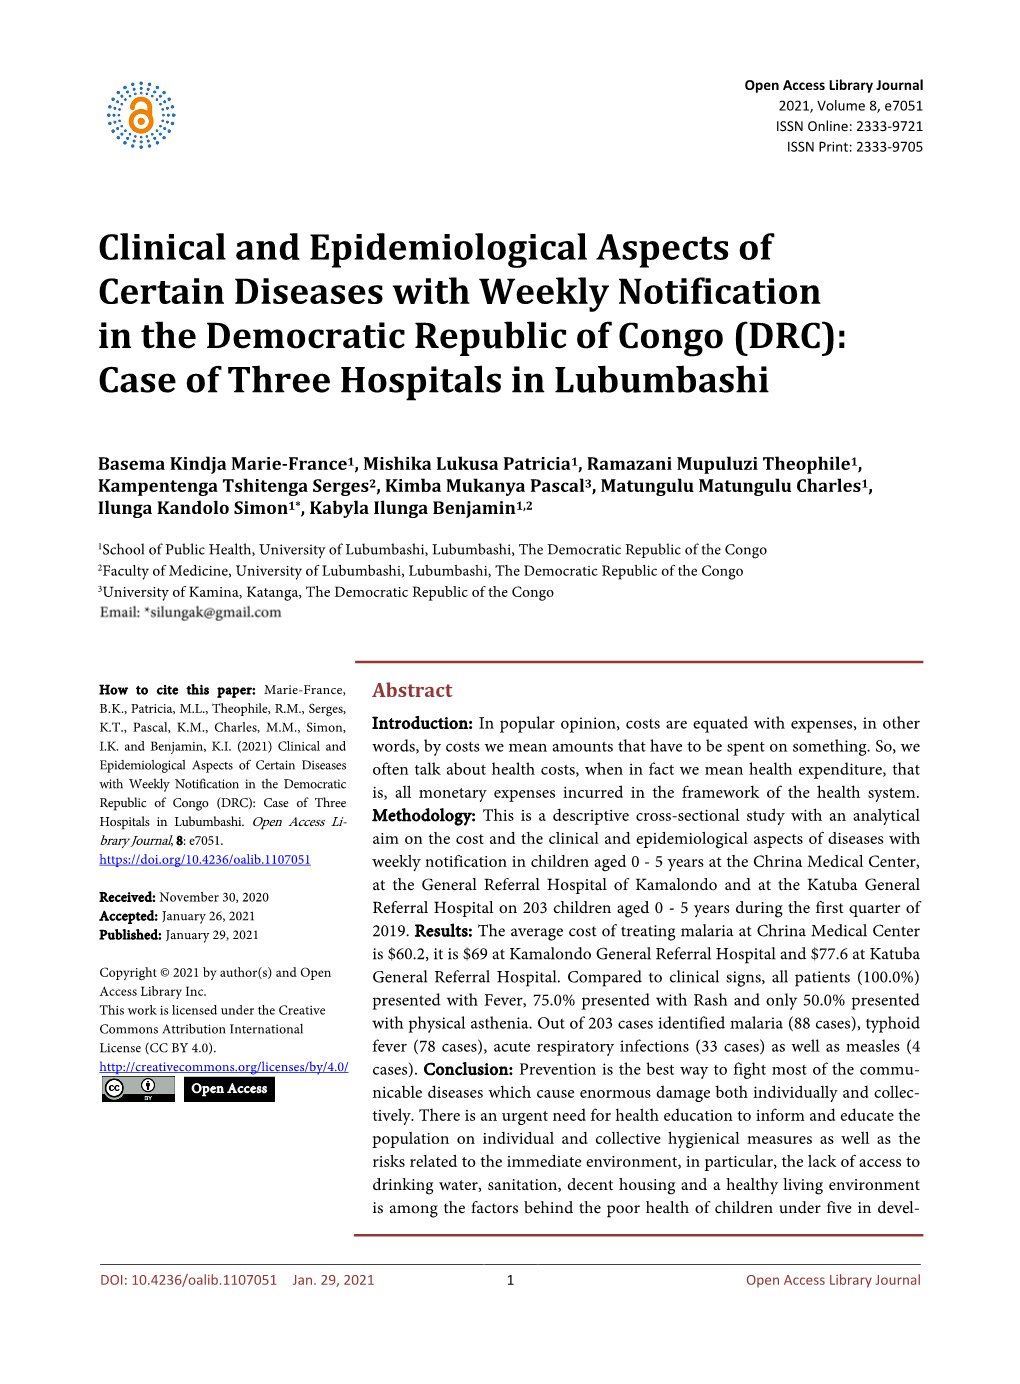 Clinical and Epidemiological Aspects of Certain Diseases with Weekly Notification in the Democratic Republic of Congo (DRC): Case of Three Hospitals in Lubumbashi